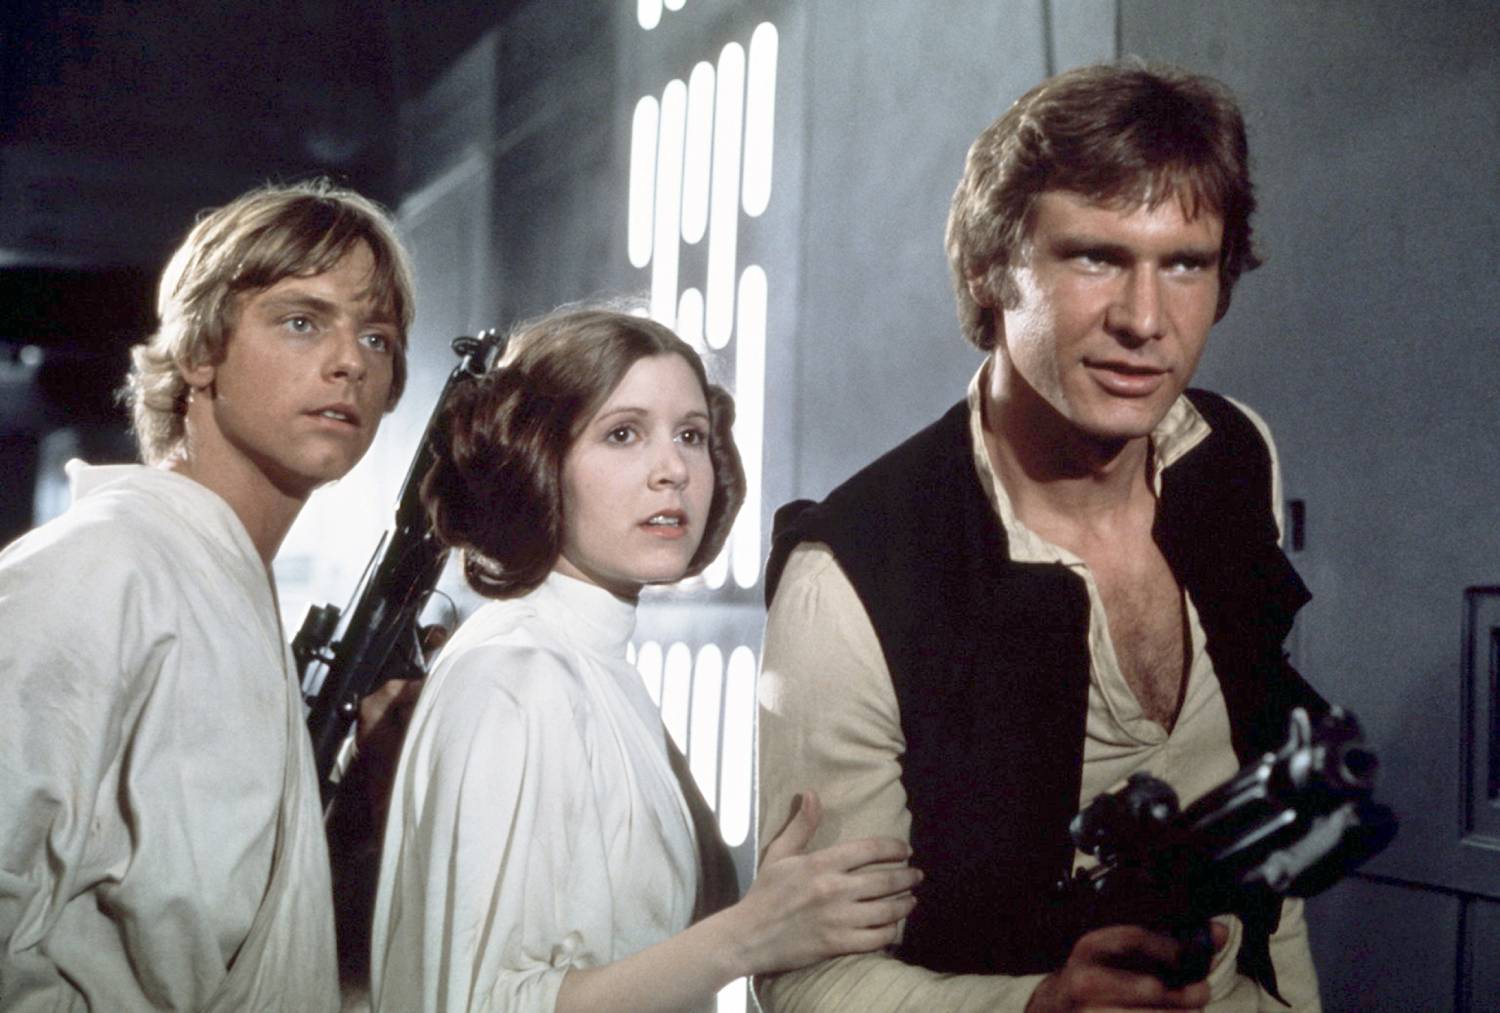 American actors Mark Hamill, Carrie Fisher and Harrison Ford on the set of Star Wars: Episode IV - A New Hope written, directed and produced by Georges Lucas.